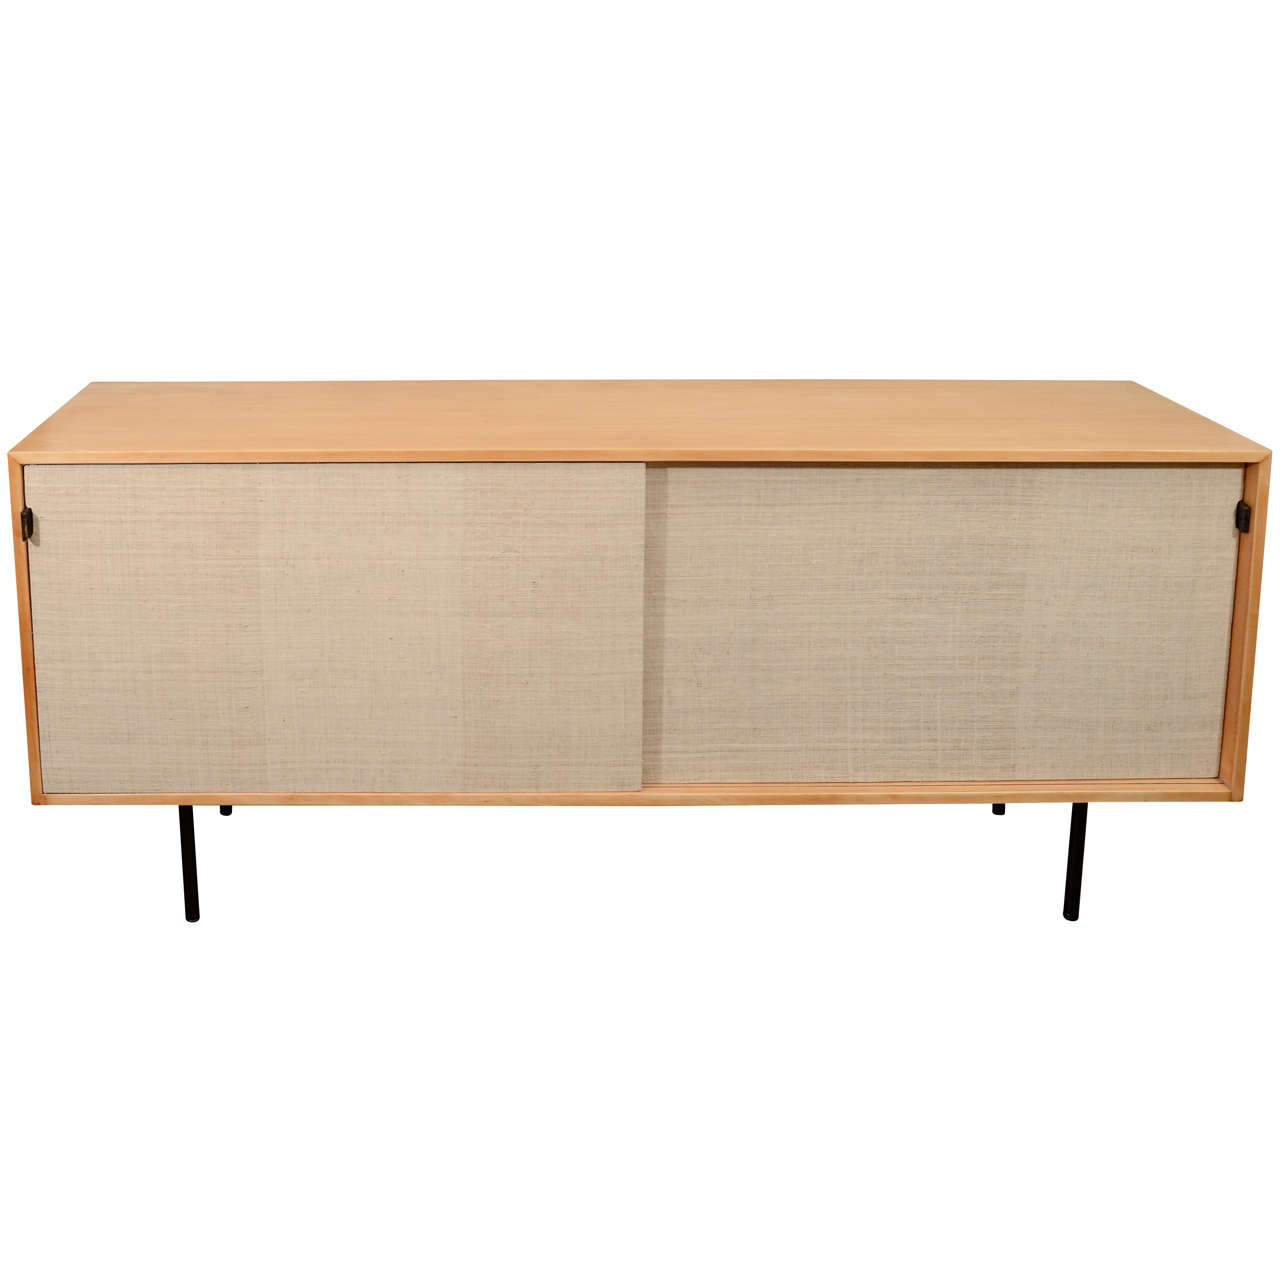 Florence Knoll Early Maple Credenza with Grass Cloth Doors